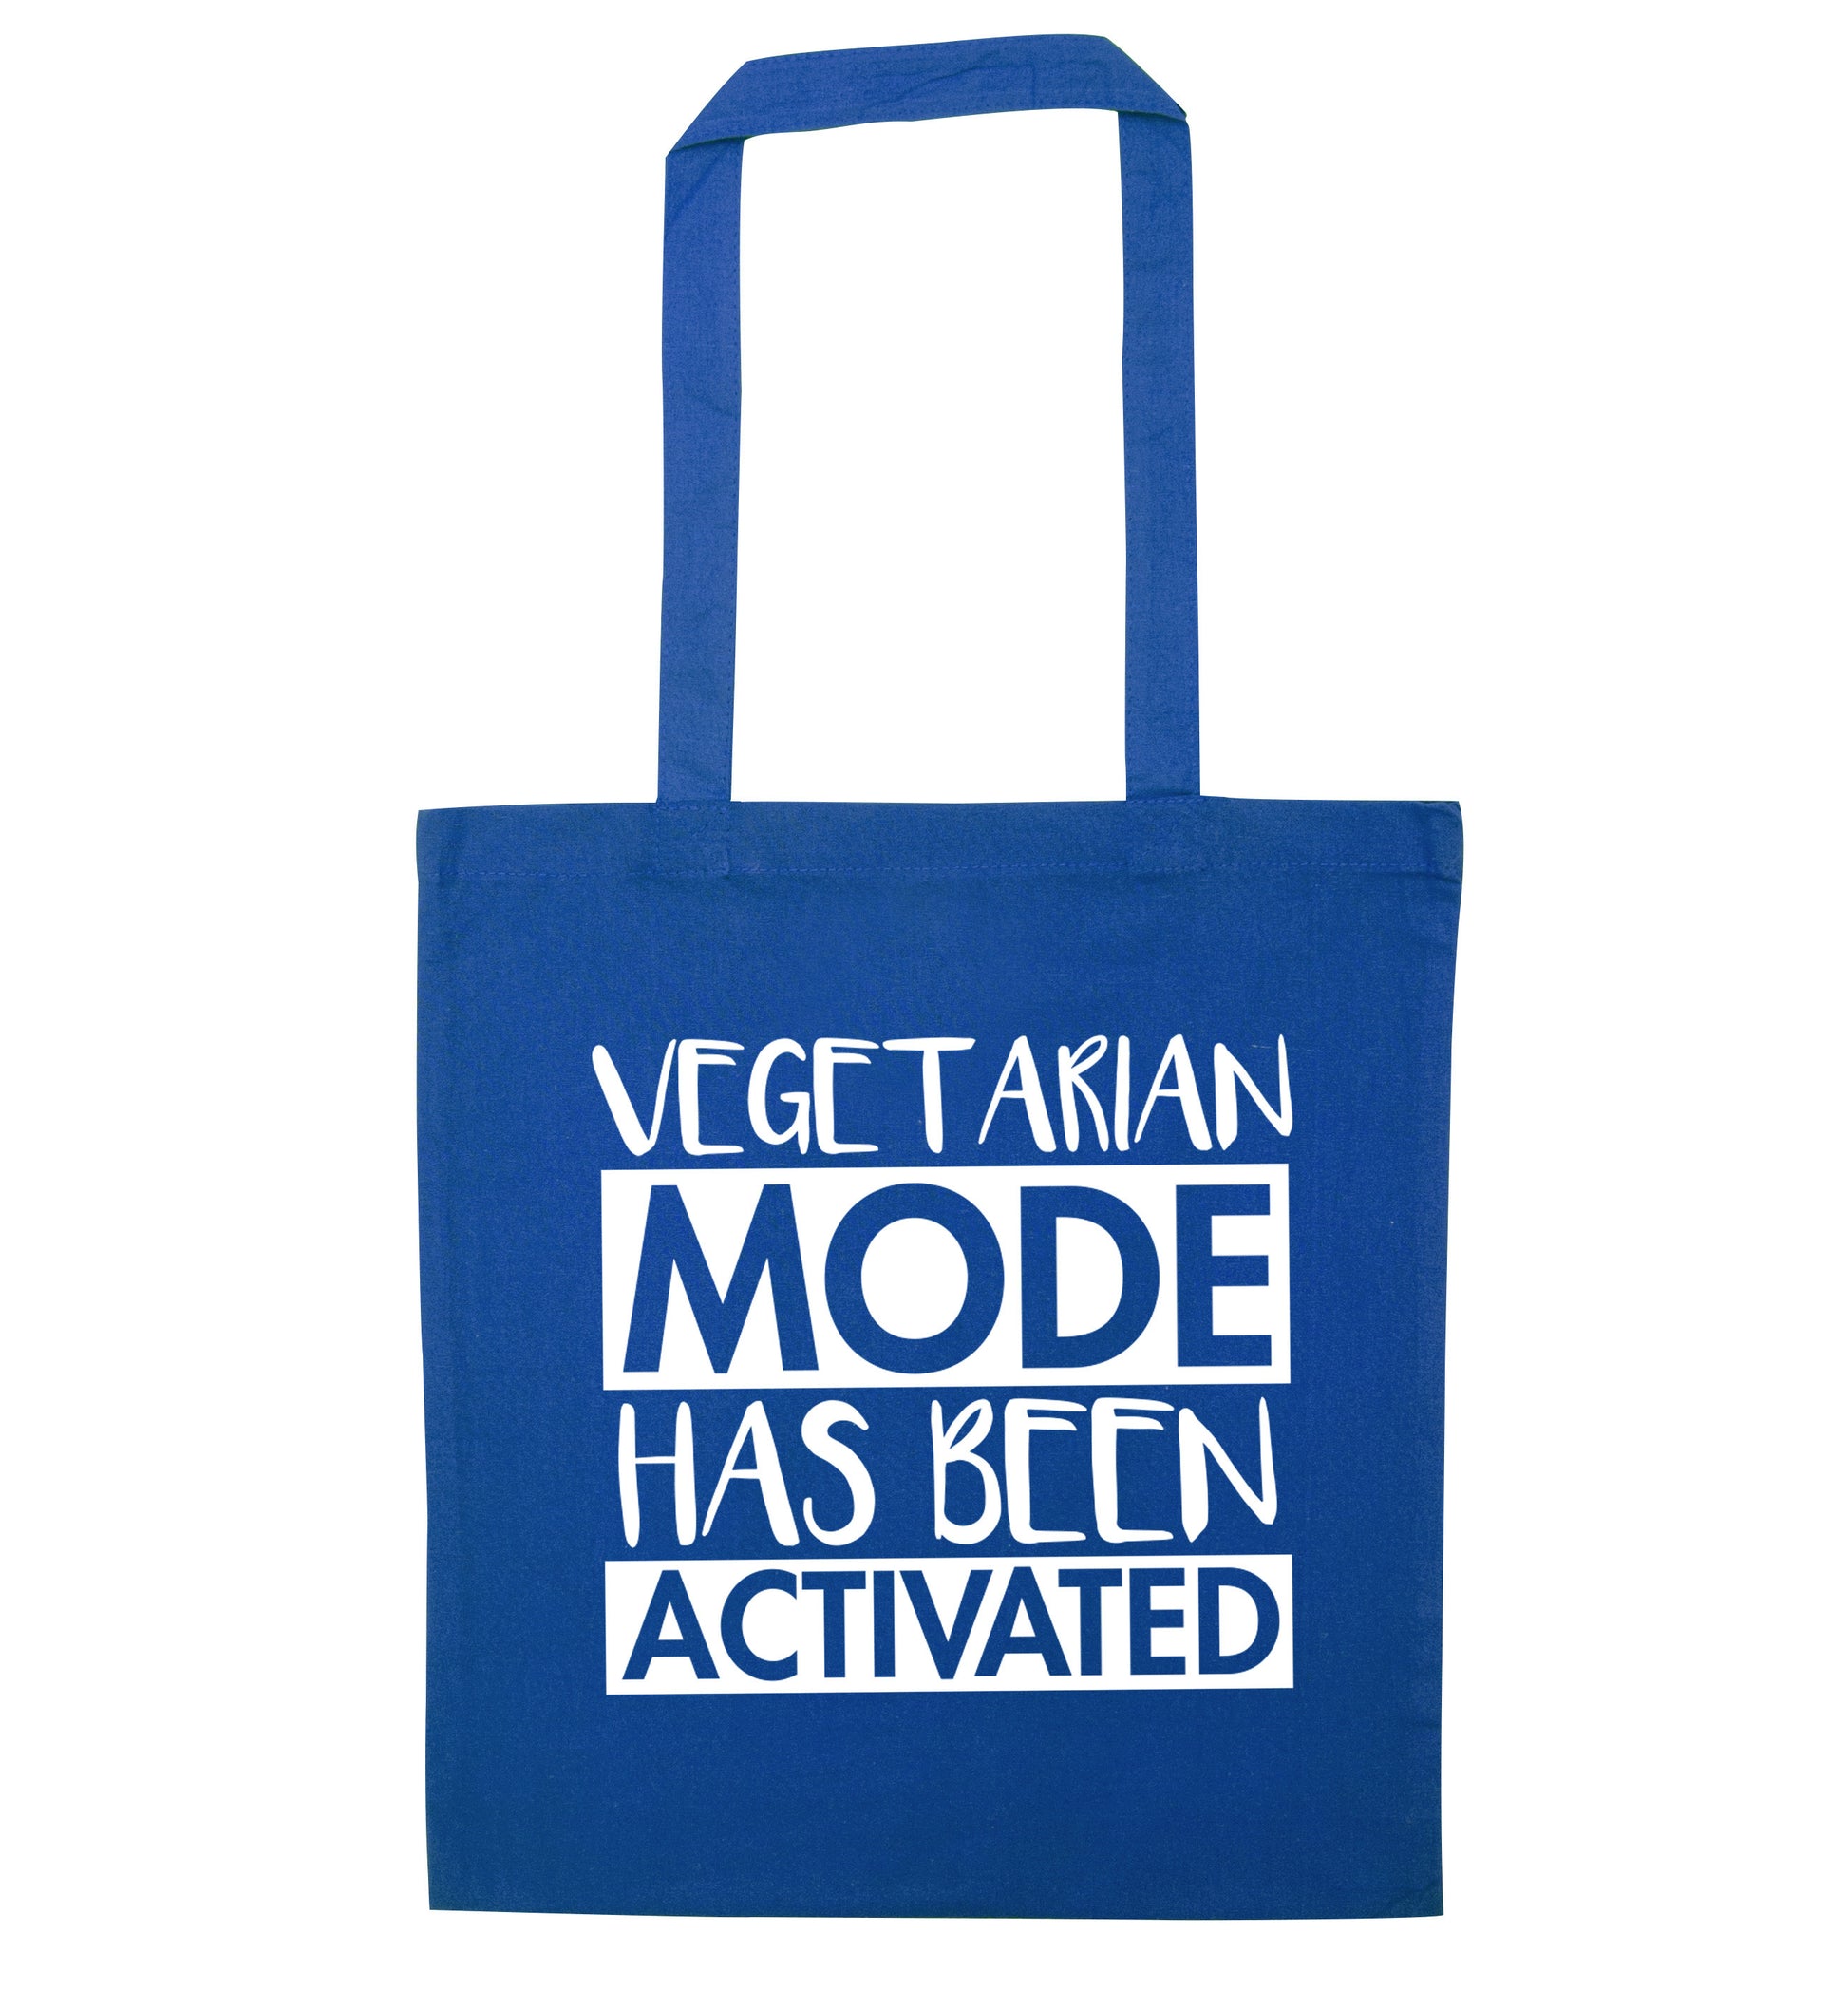 Vegetarian mode activated blue tote bag